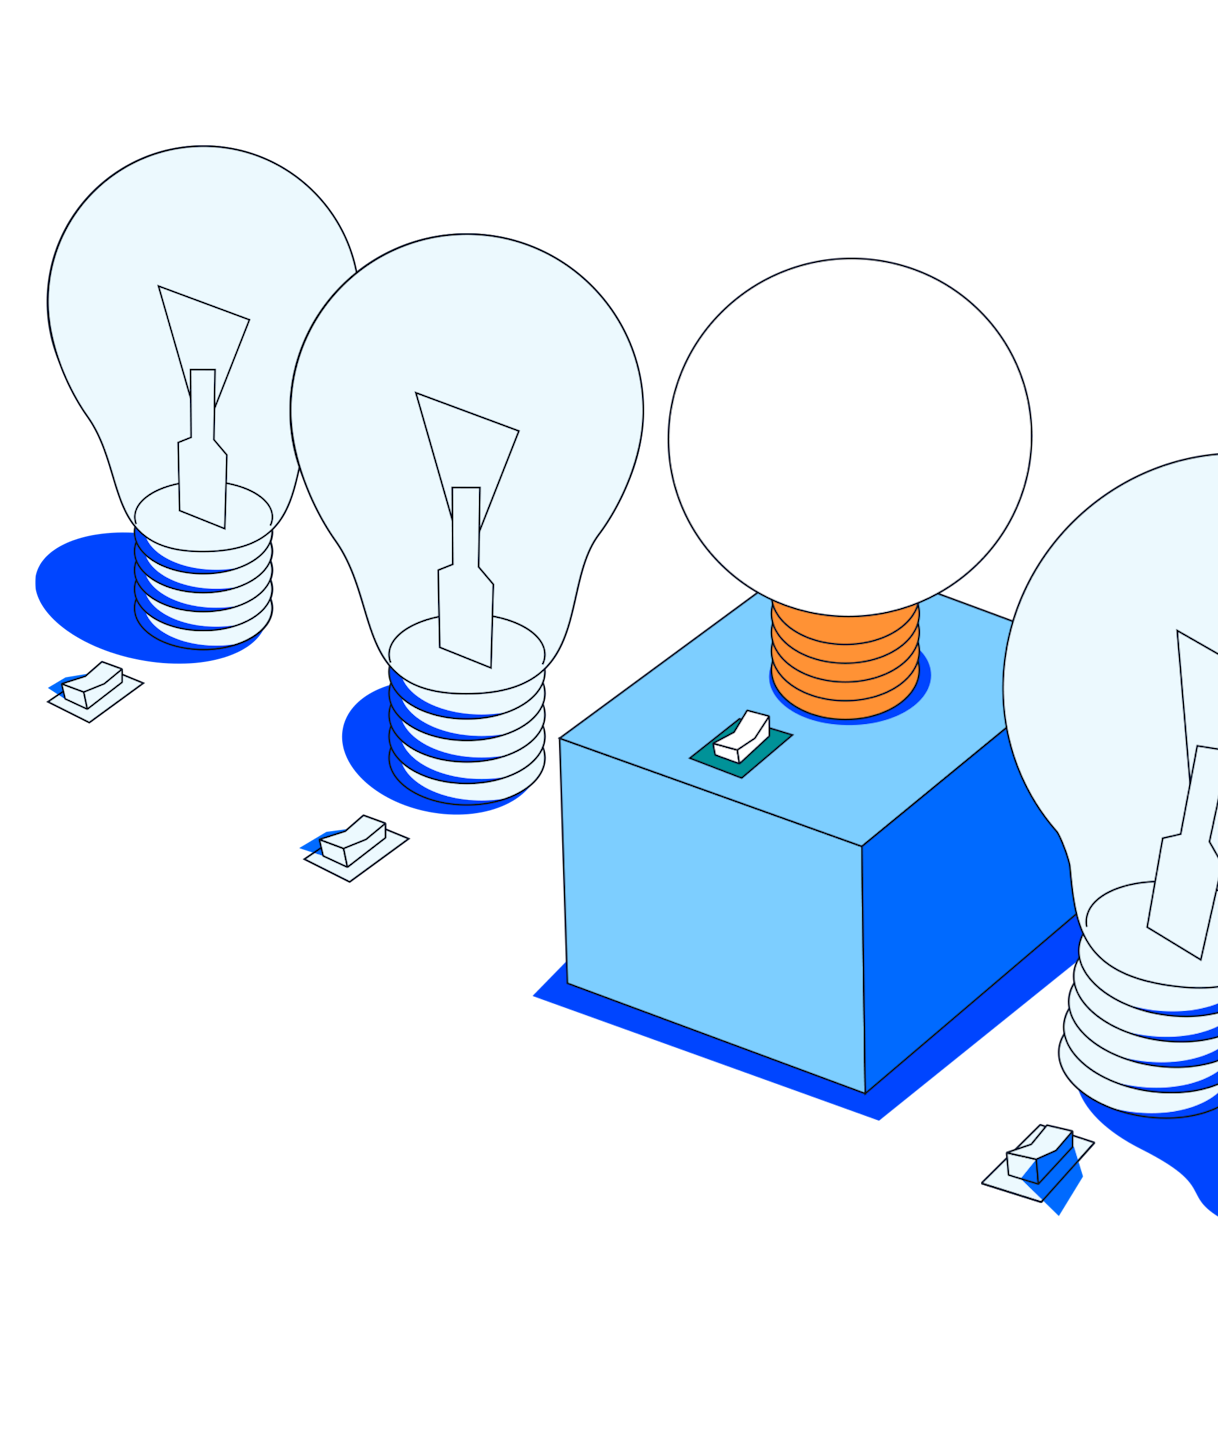 Row of four lightbulbs with switches, one lightbulb is turned on, representing UX leaders